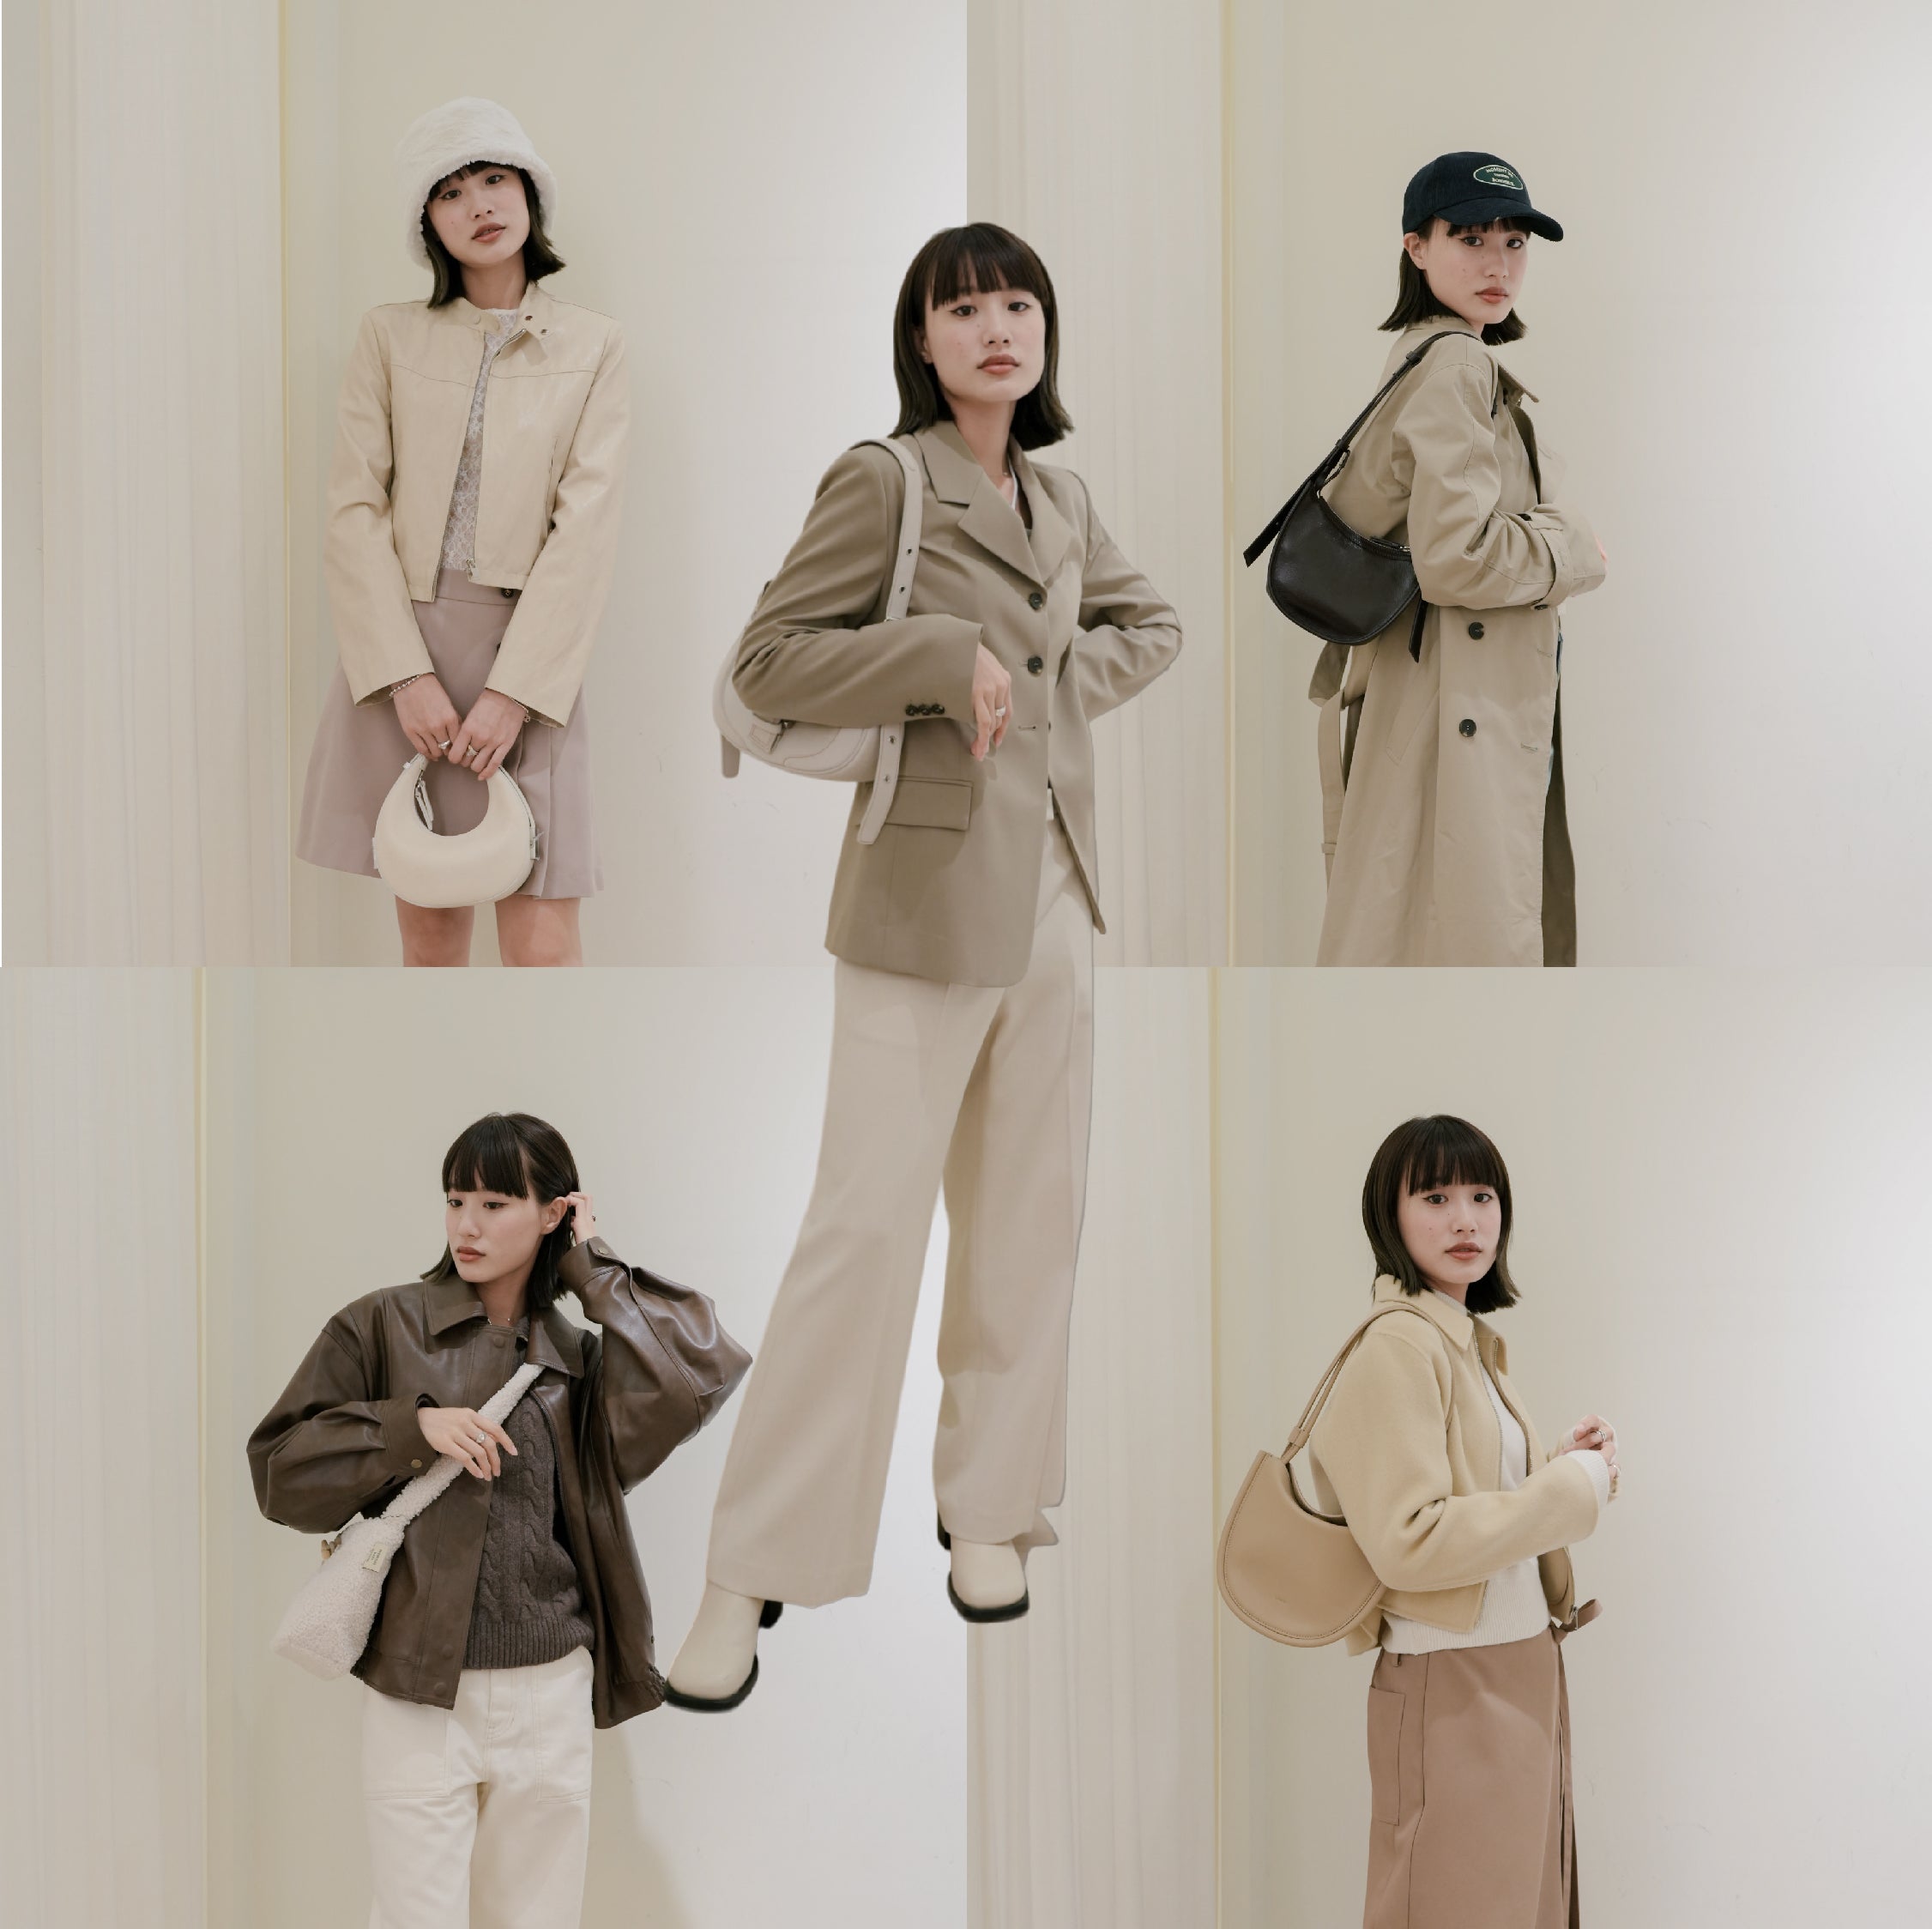 Winter Looks With Pui Yi Leung